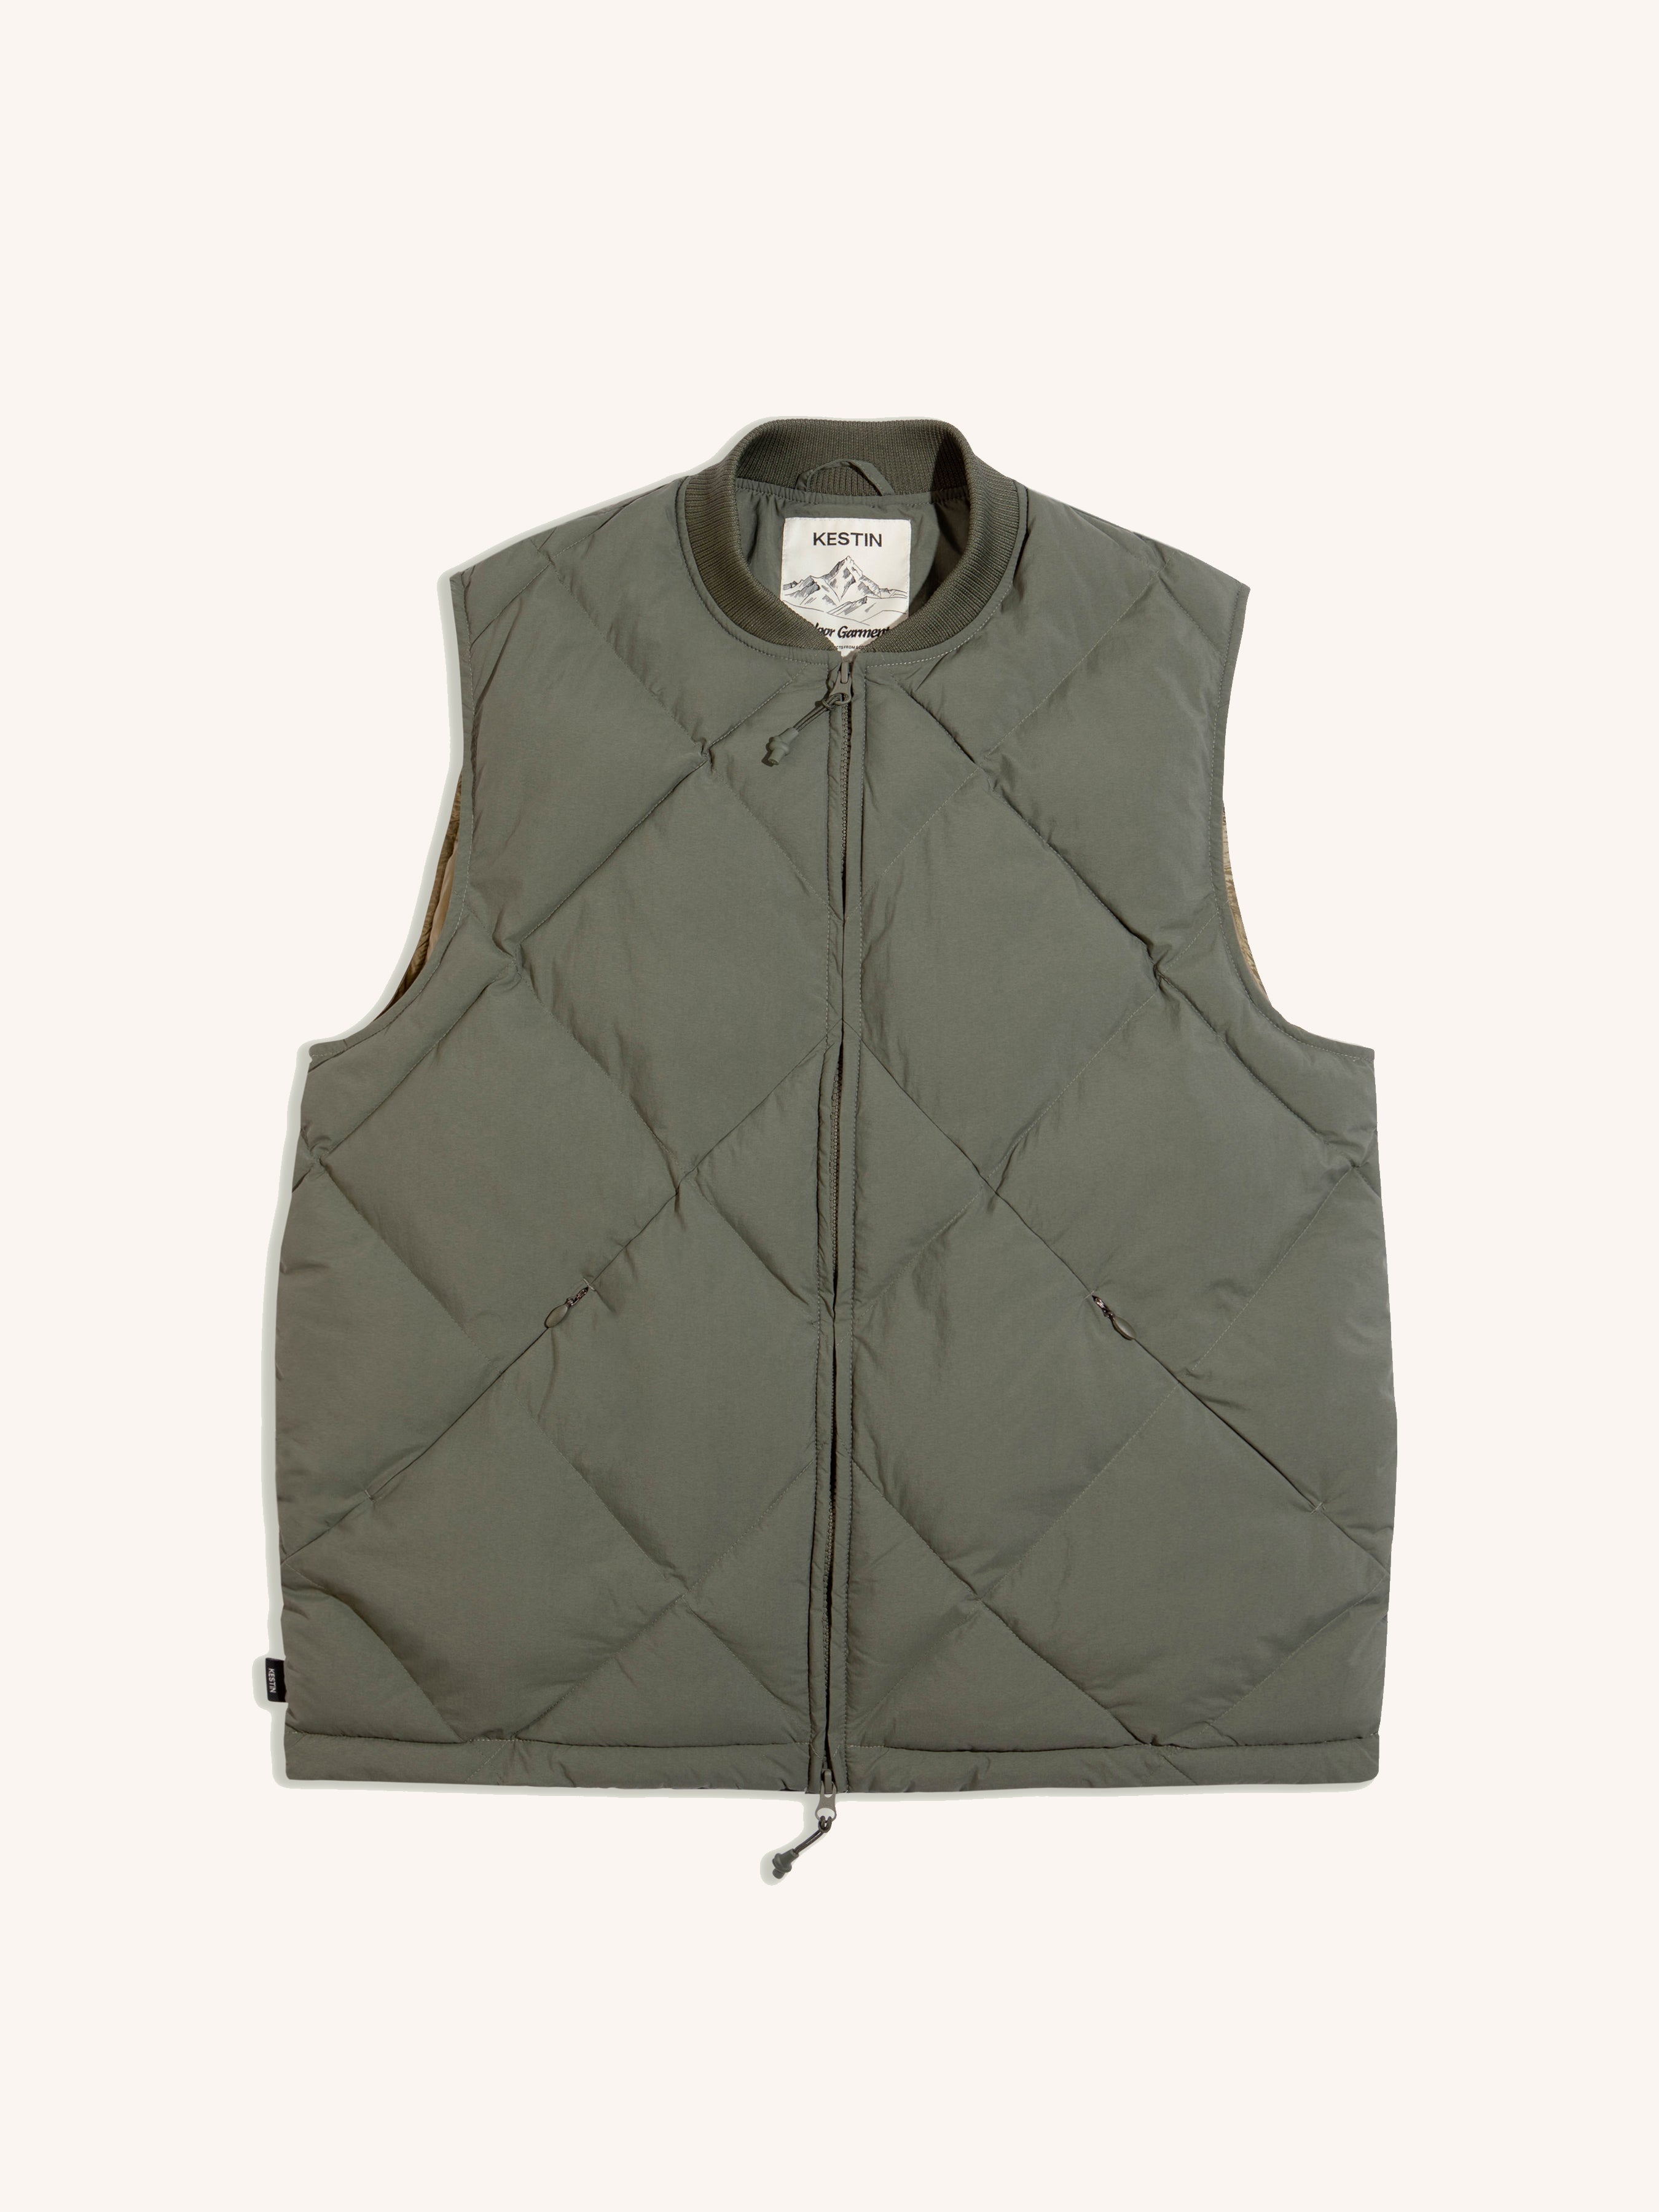 The Linton Vest by KESTIN is a premium men's insulated gilet, perfect for layering.